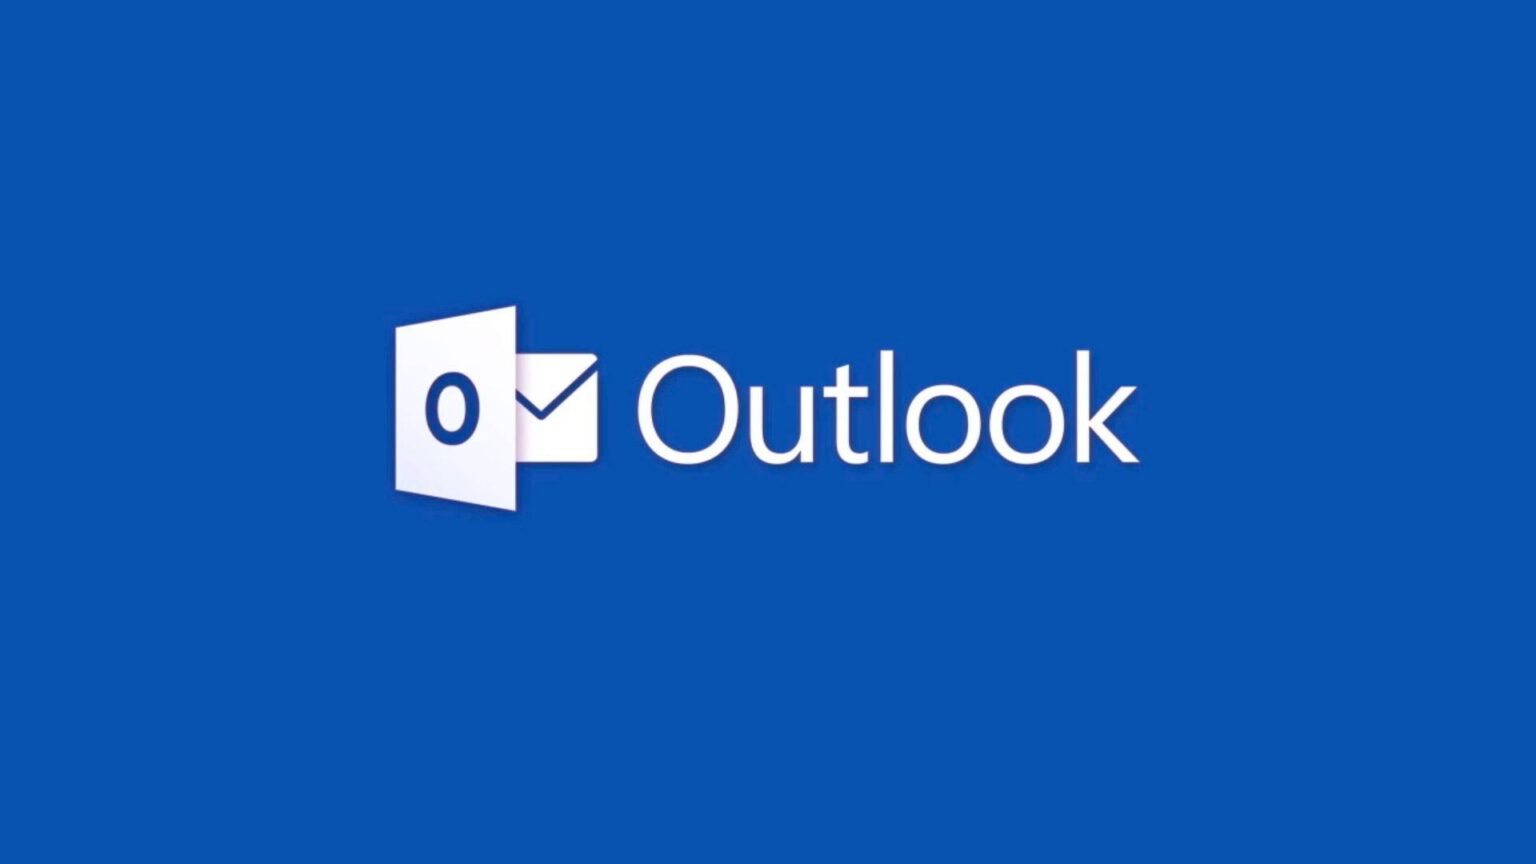 Have you found an error [ pii_email_0d304b417851a62ee487] When trying to send or receive an email using your Outlook account, you are not alone. This is a common Outlook error that is usually triggered due to network connectivity problems. However, several other factors can also make you experience this error. The good news is you can solve this error problem yourself. In this guide, we will talk about various factors that cause PII errors and what methods you can use to fix them. So, without further Ado, let's start. What caused an error [pii_email_0d304b417851a62e487] in MS Outlook In general, errors occur when MS Outlook fails to make a secure connection with an email server. But, as we mentioned before, there are many other reasons that can trigger this error too. Some of these reasons include: Your device is not connected to an active internet connection Your Outlook profile has been damaged due to external factors There is an antivirus configuration wrong on your PC The file on your POP3 server is broken How to fix [pii_email_0d304b417851a62e487] error So, now you know what triggers [piiemail_0d304b417851a6877] in Outlook, let's look at the solution that will help you fix it. Check your internet connection Because poor network connections are the main causes of errors, start by checking your internet connection. Make sure your device has active internet connectivity. You can try accessing other online services to see if the internet functions or not. Change the antivirus configuration If you have just installed an antivirus program on your PC, it might be configured to scan emails automatically. If that's the problem, the antivirus will limit the Outlook application to function properly. So, make sure to change the antivirus configuration by deactivating the "Email Scan" feature. Reinstall / Update Outlook Reinstalling or updating Outlook to the latest version is another effective way to correct errors [ pii_email_0d304b417851a62ee487]. When you reinstall the application, all the corrupted temporary files will be deleted and the root of the problem will be removed too. Delete an unnecessary email from the Outlook folder If your main inbox has too many unnecessary emails, they will cause bandwidth problems. This is the reason always it is recommended to delete an unnecessary email from your Outlook folder. When you do it, make sure to clean up the garbage too. This will help your Outlook application to provide optimal performance. Conclusion So, if you have found an error [piiemail_0d304b417851a6877] for a while now, the mentioned above will help you fix the problem. Follow this trick and access your Outlook account without hassle.